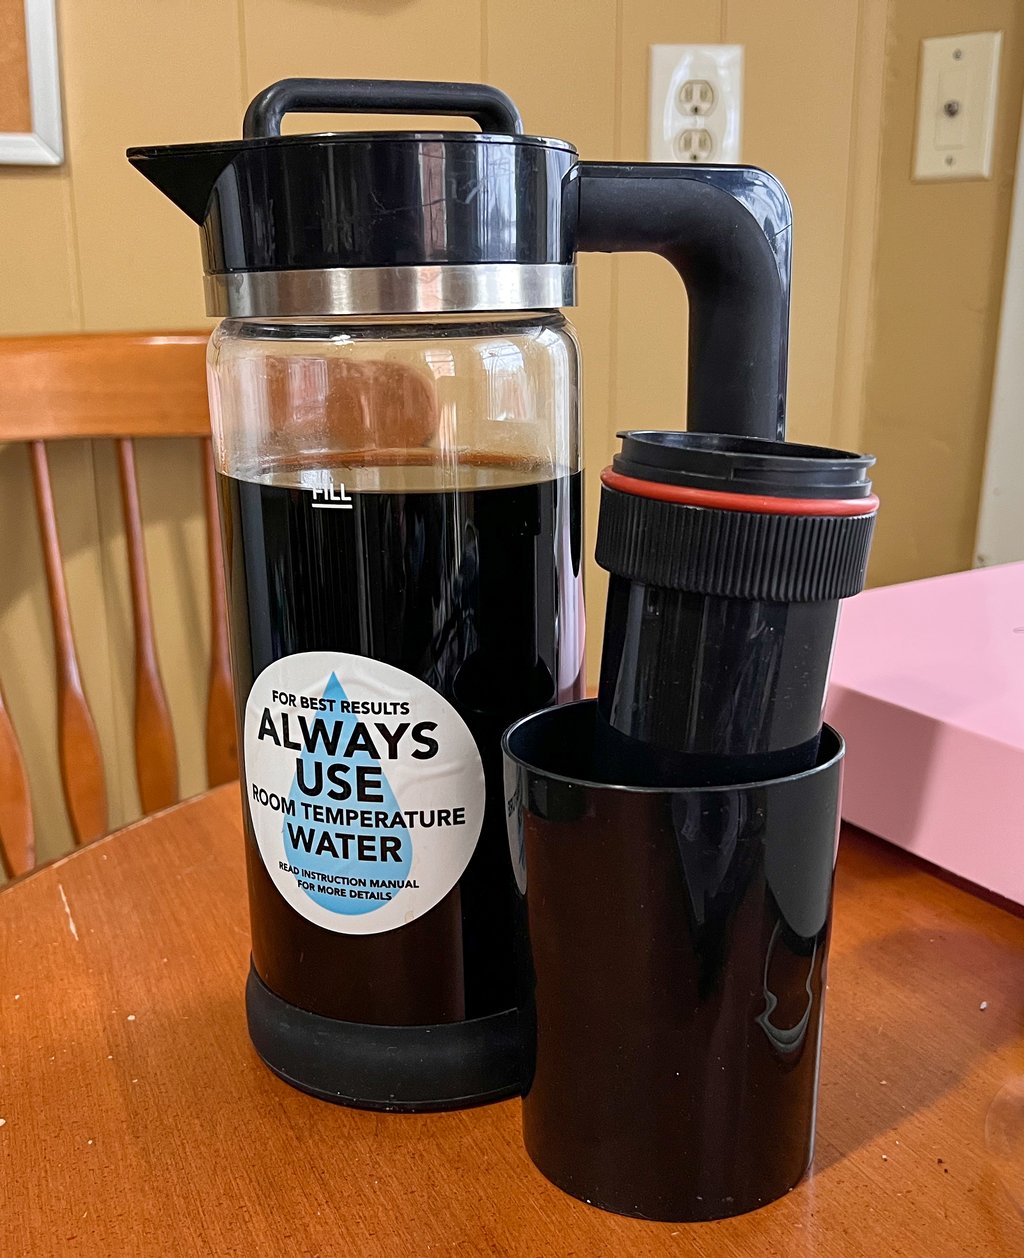 Takeya cold brew coffee maker: Our No.1 pick is less than $20 at